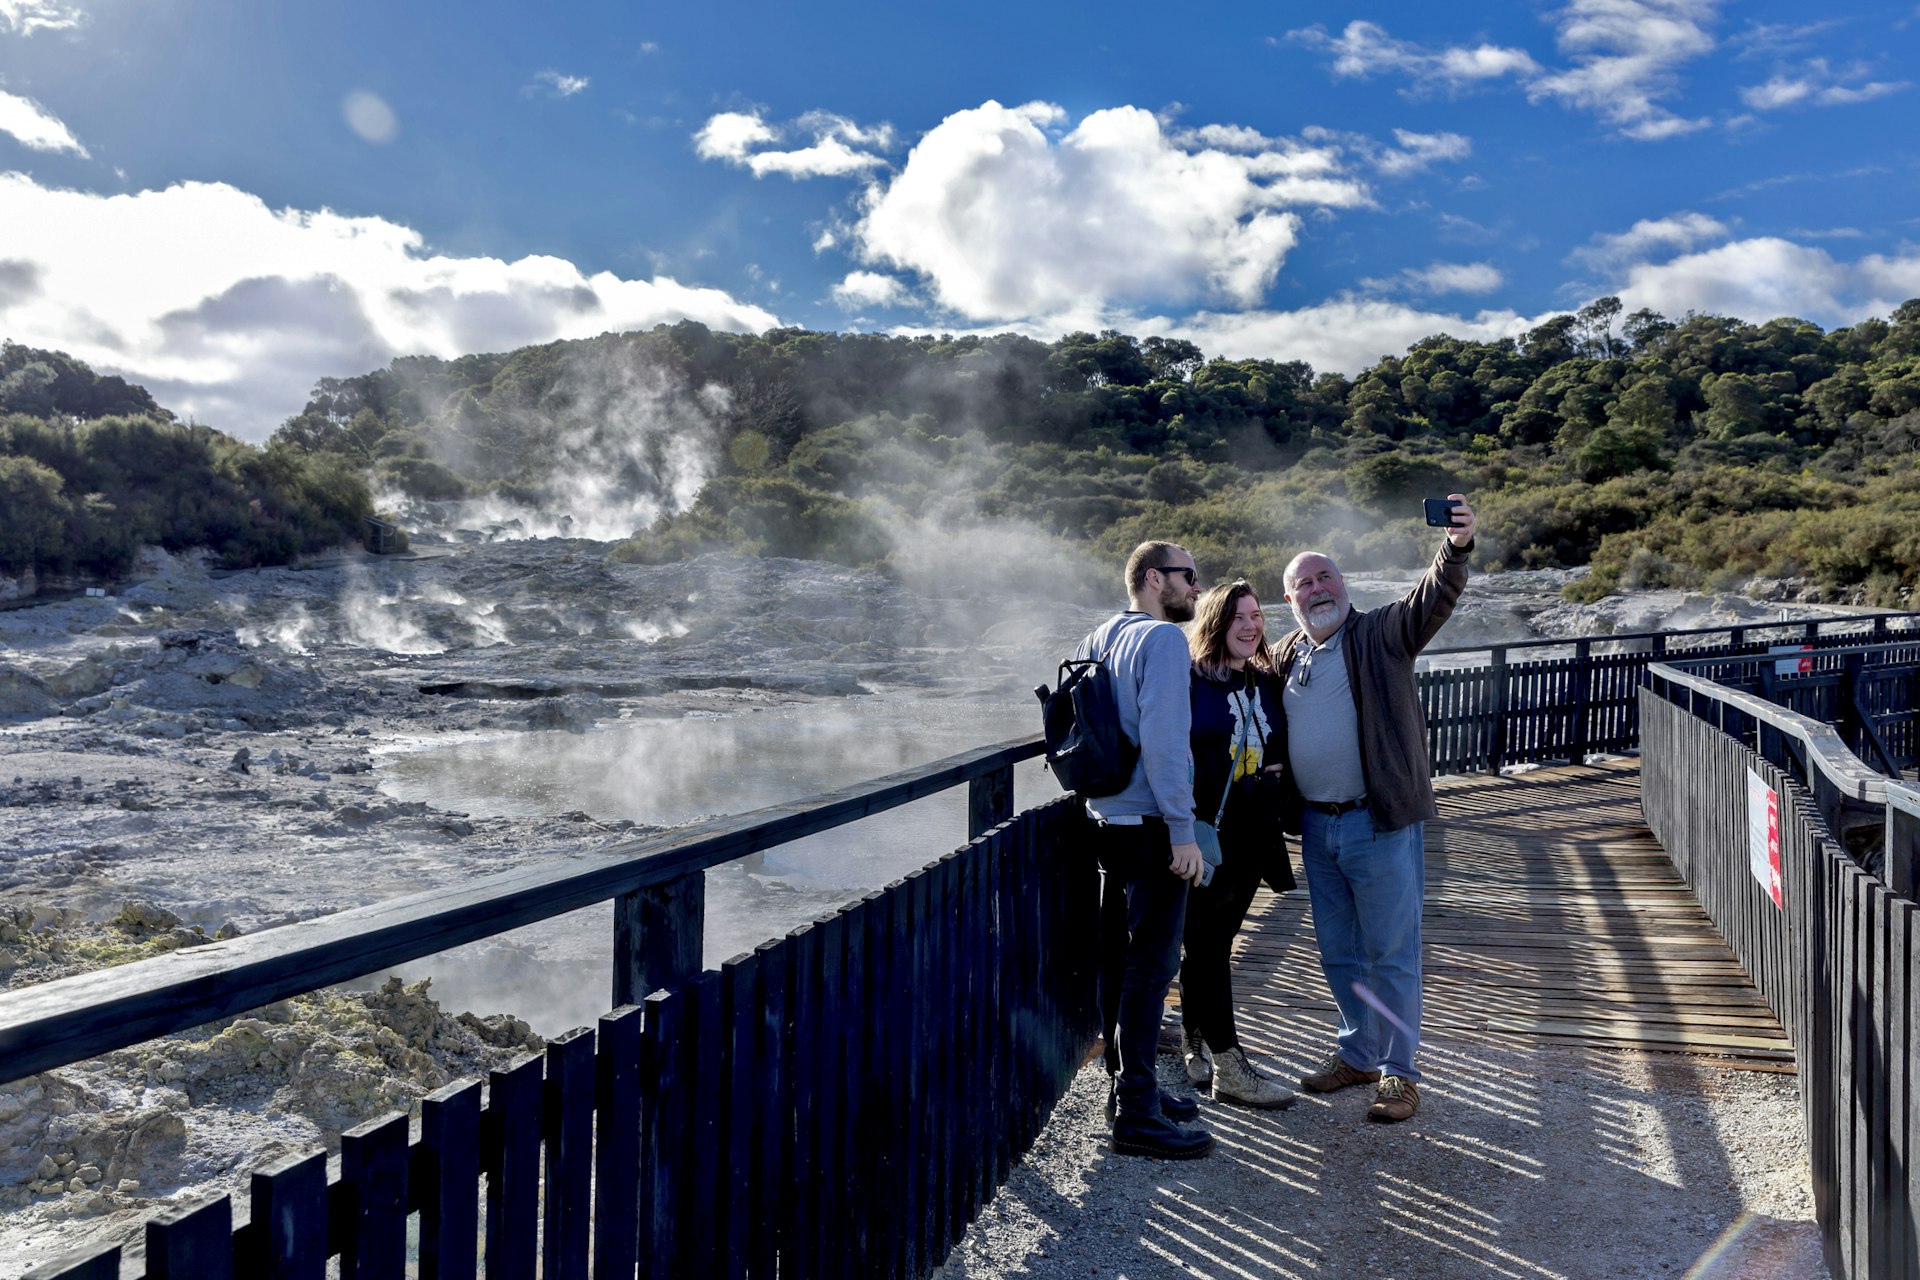 Three people of differing ages stand on a boardwalk and pose for a selfie. Behind them the earth is steaming and bubbling